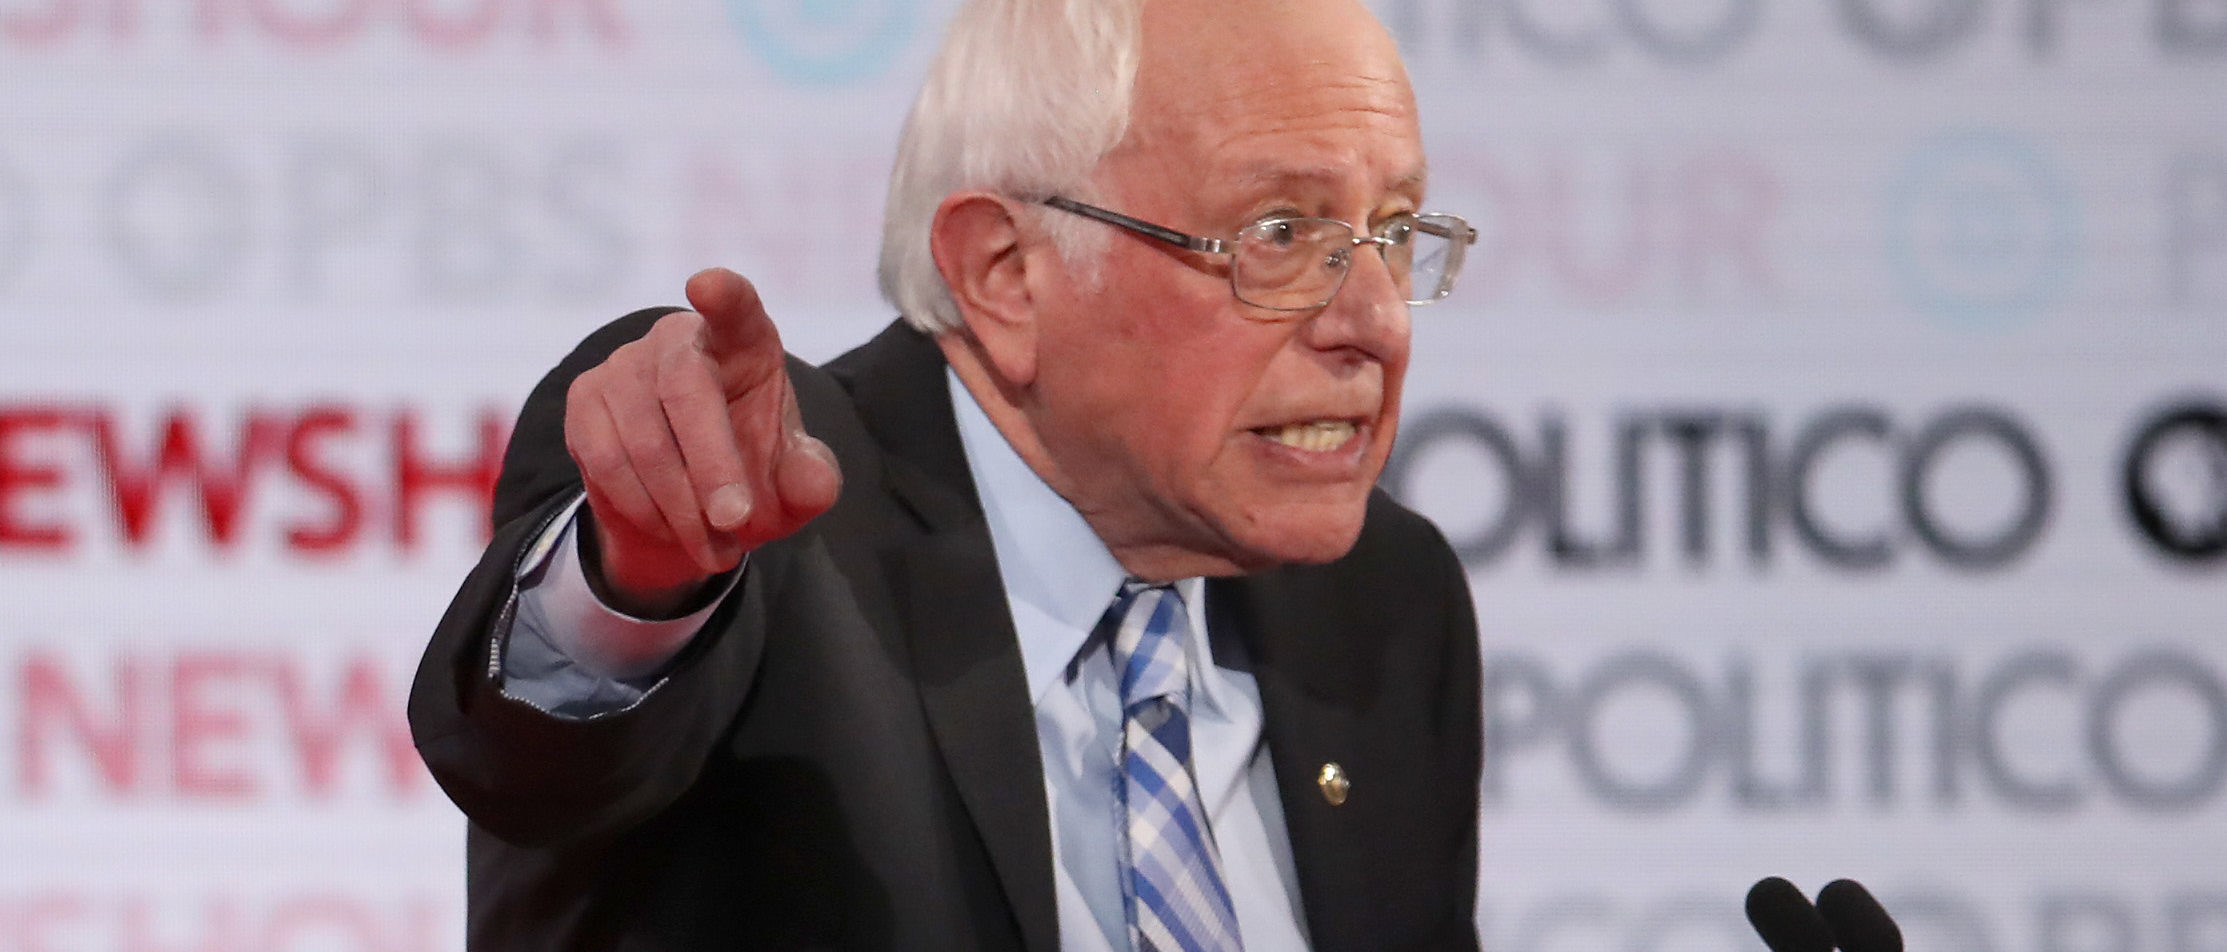 LOS ANGELES, CALIFORNIA - DECEMBER 19: Sen. Bernie Sanders (I-VT) (L) points during the Democratic presidential primary debate at Loyola Marymount University on December 19, 2019 in Los Angeles, California. Seven candidates out of the crowded field qualified for the 6th and last Democratic presidential primary debate of 2019 hosted by PBS NewsHour and Politico. (Photo by Justin Sullivan/Getty Images)